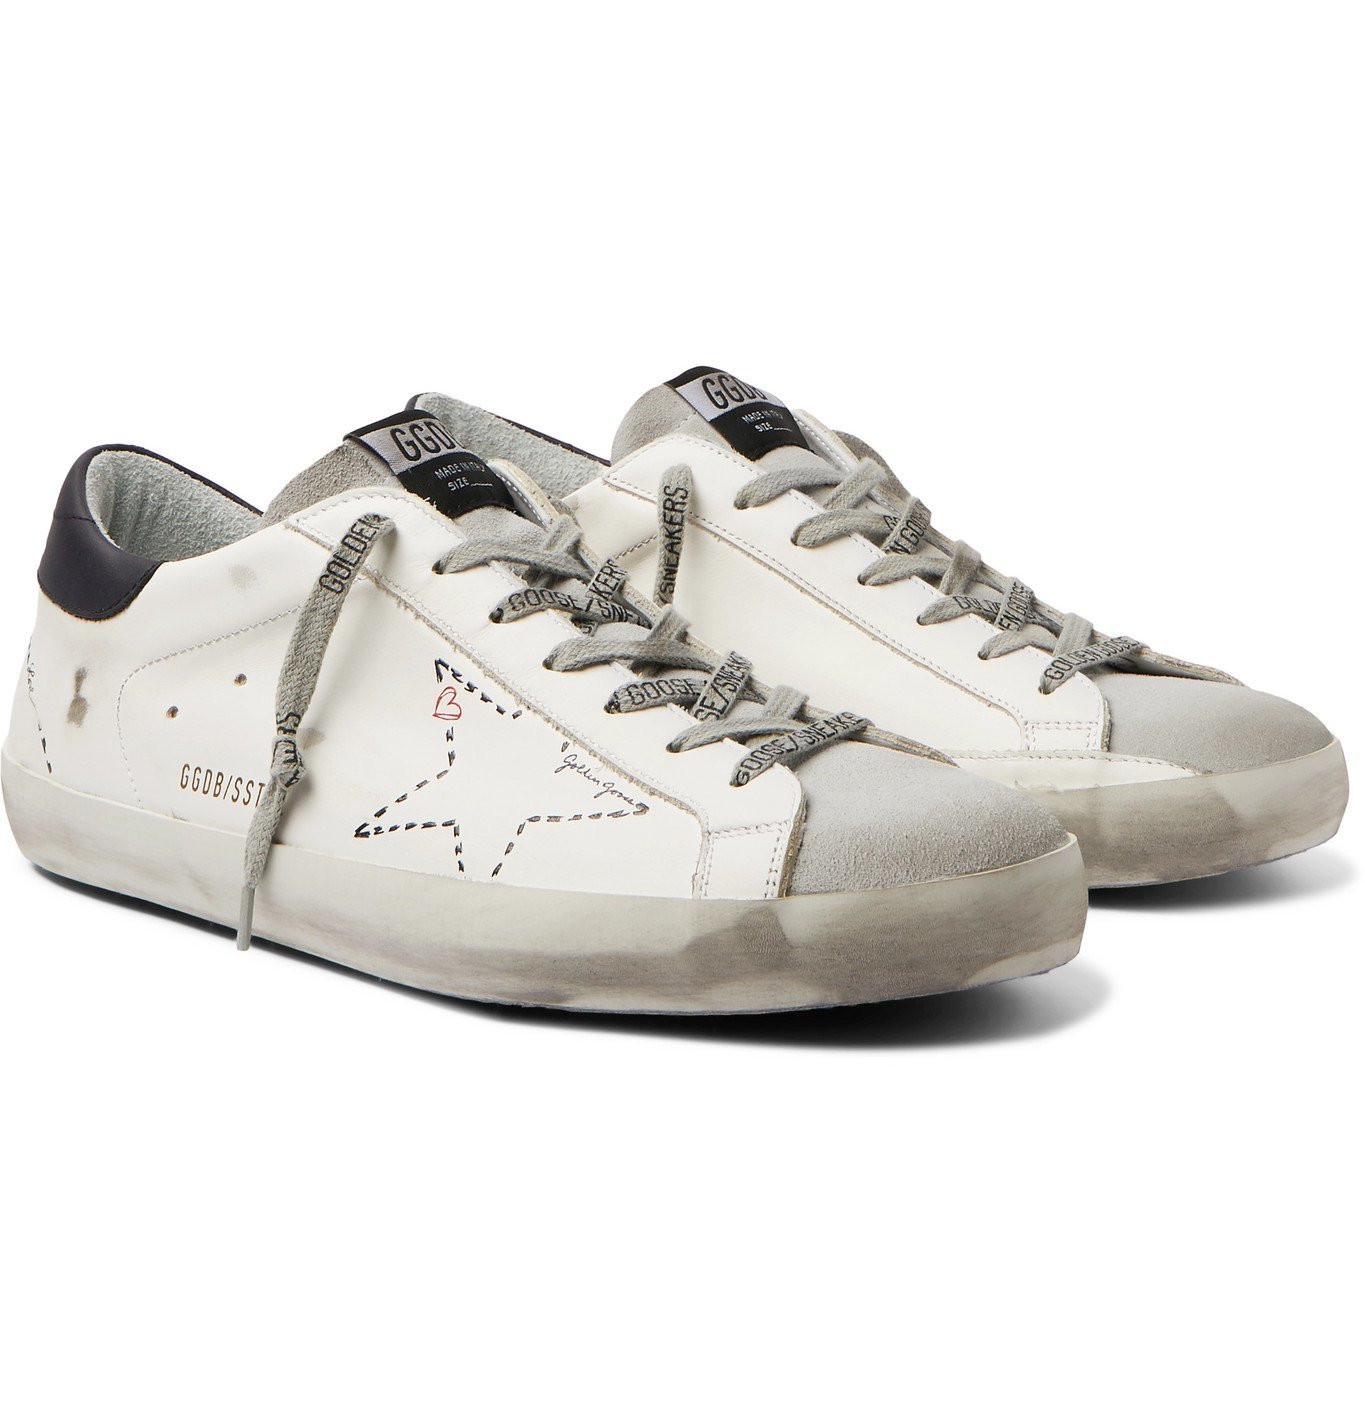 Golden Superstar Distressed Leather and Suede White Golden Goose Deluxe Brand